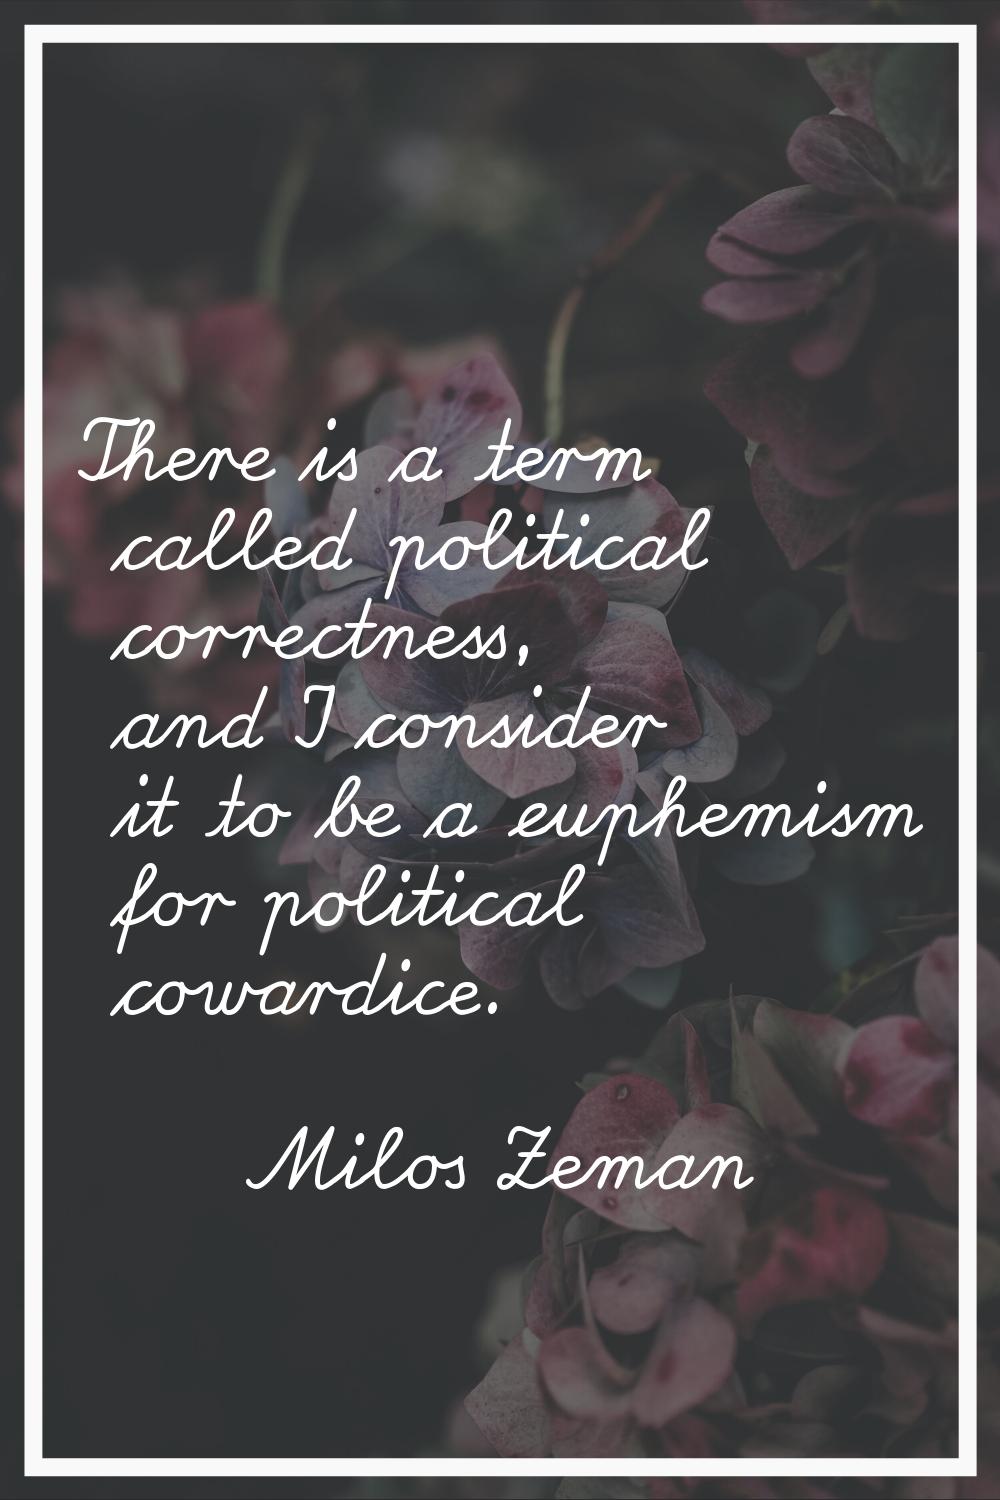 There is a term called political correctness, and I consider it to be a euphemism for political cow